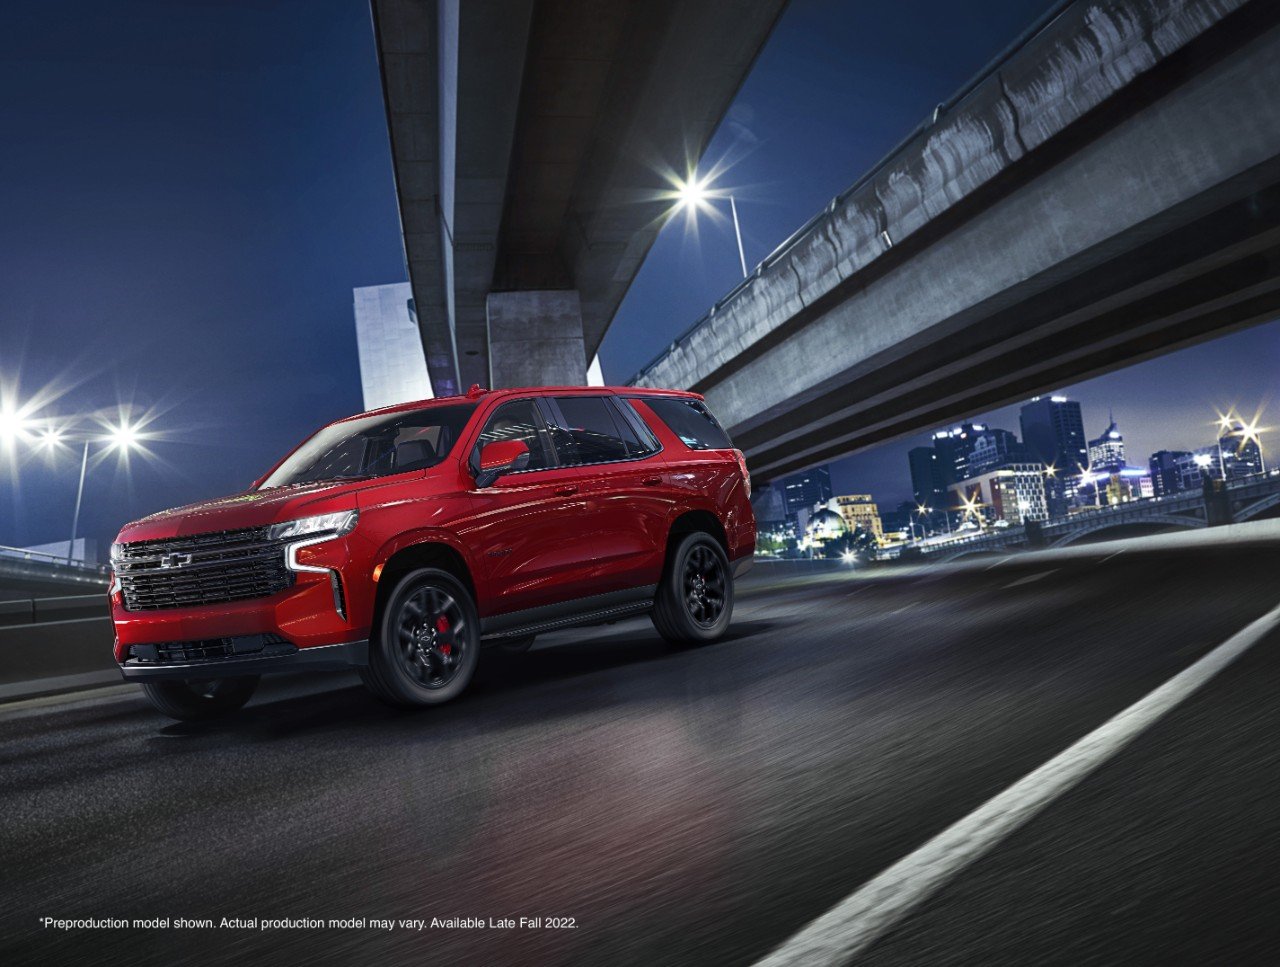 CHEVROLET INTRODUCES 2023 TAHOE RST PERFORMANCE EDITION WITH MORE HORSEPOWER, SPEED © Copyright PLPG GLOBAL MEDIA 2023